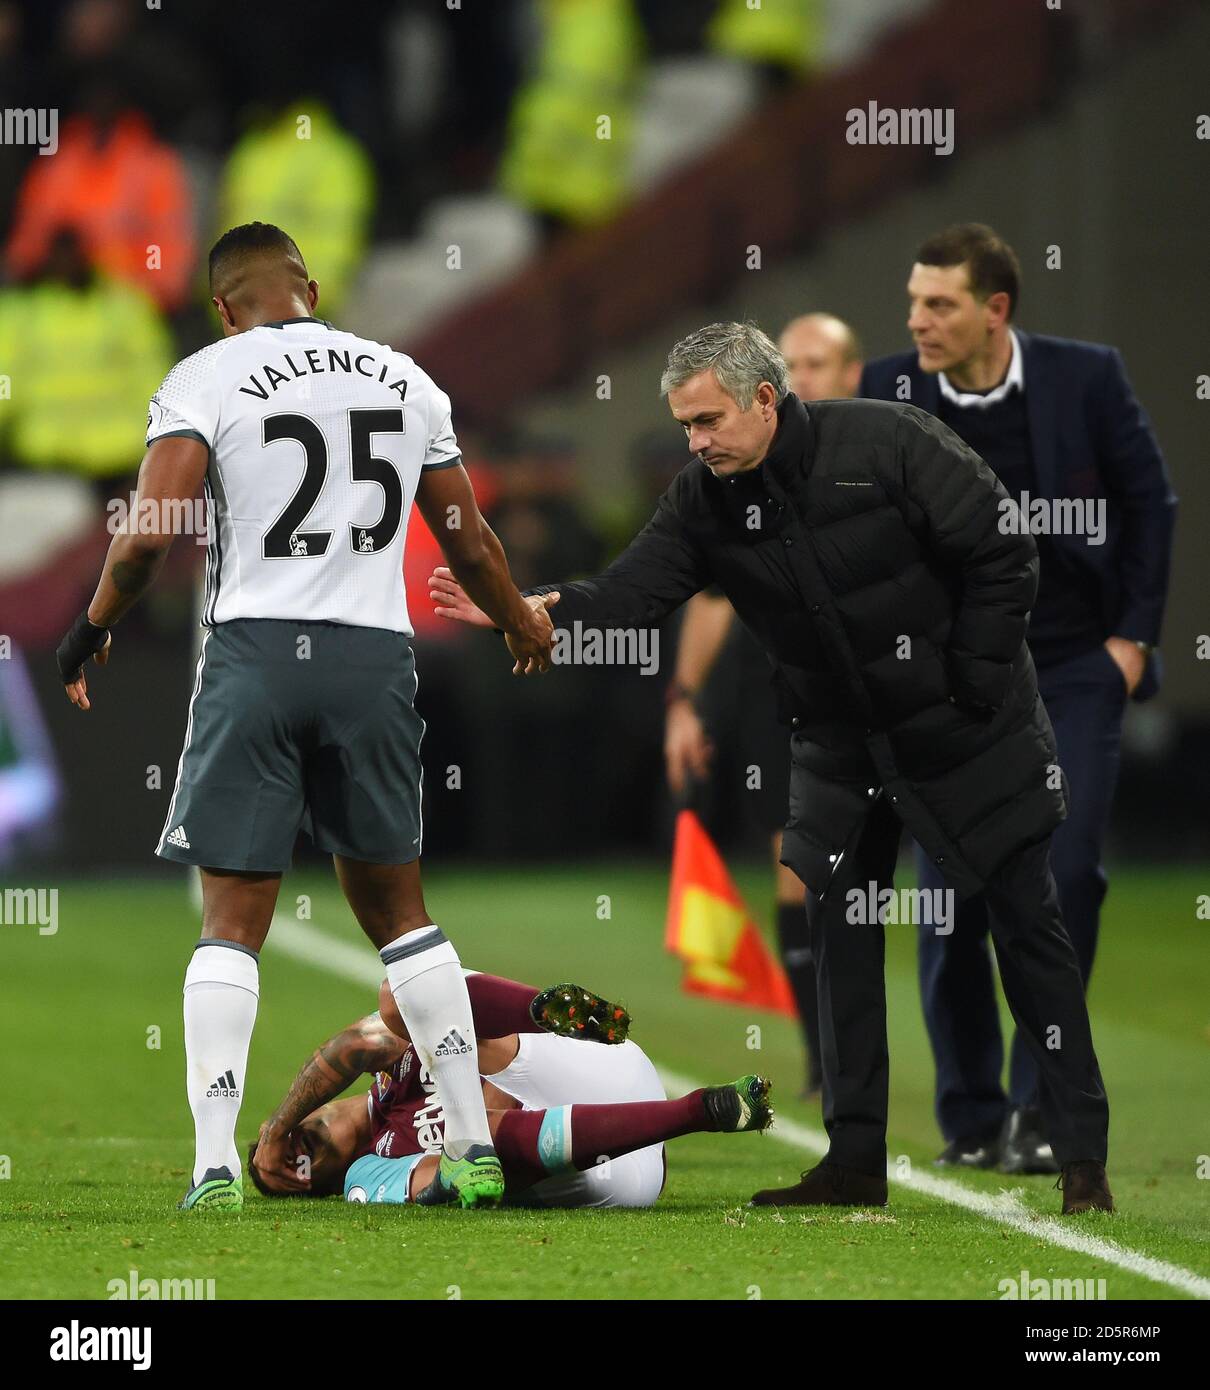 Manchester United's Luis Antonio Valencia (left) shakes hands with manager Jose Mourinho as West Ham United's Manuel Lanzini lies in pain Stock Photo